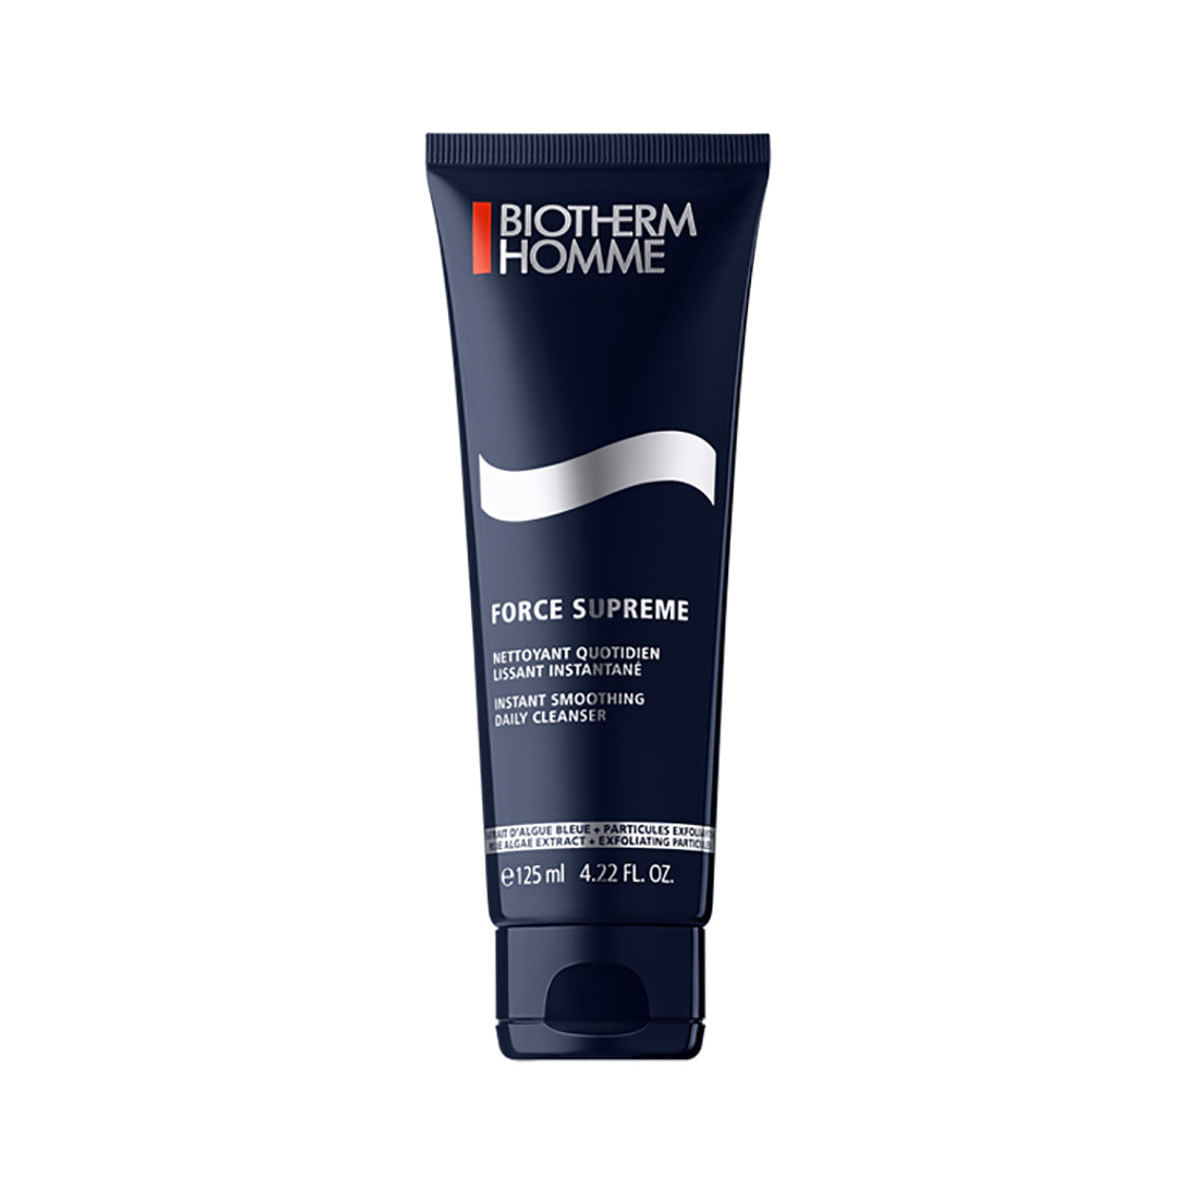 Biotherm Homme Force Supreme Nettoyant